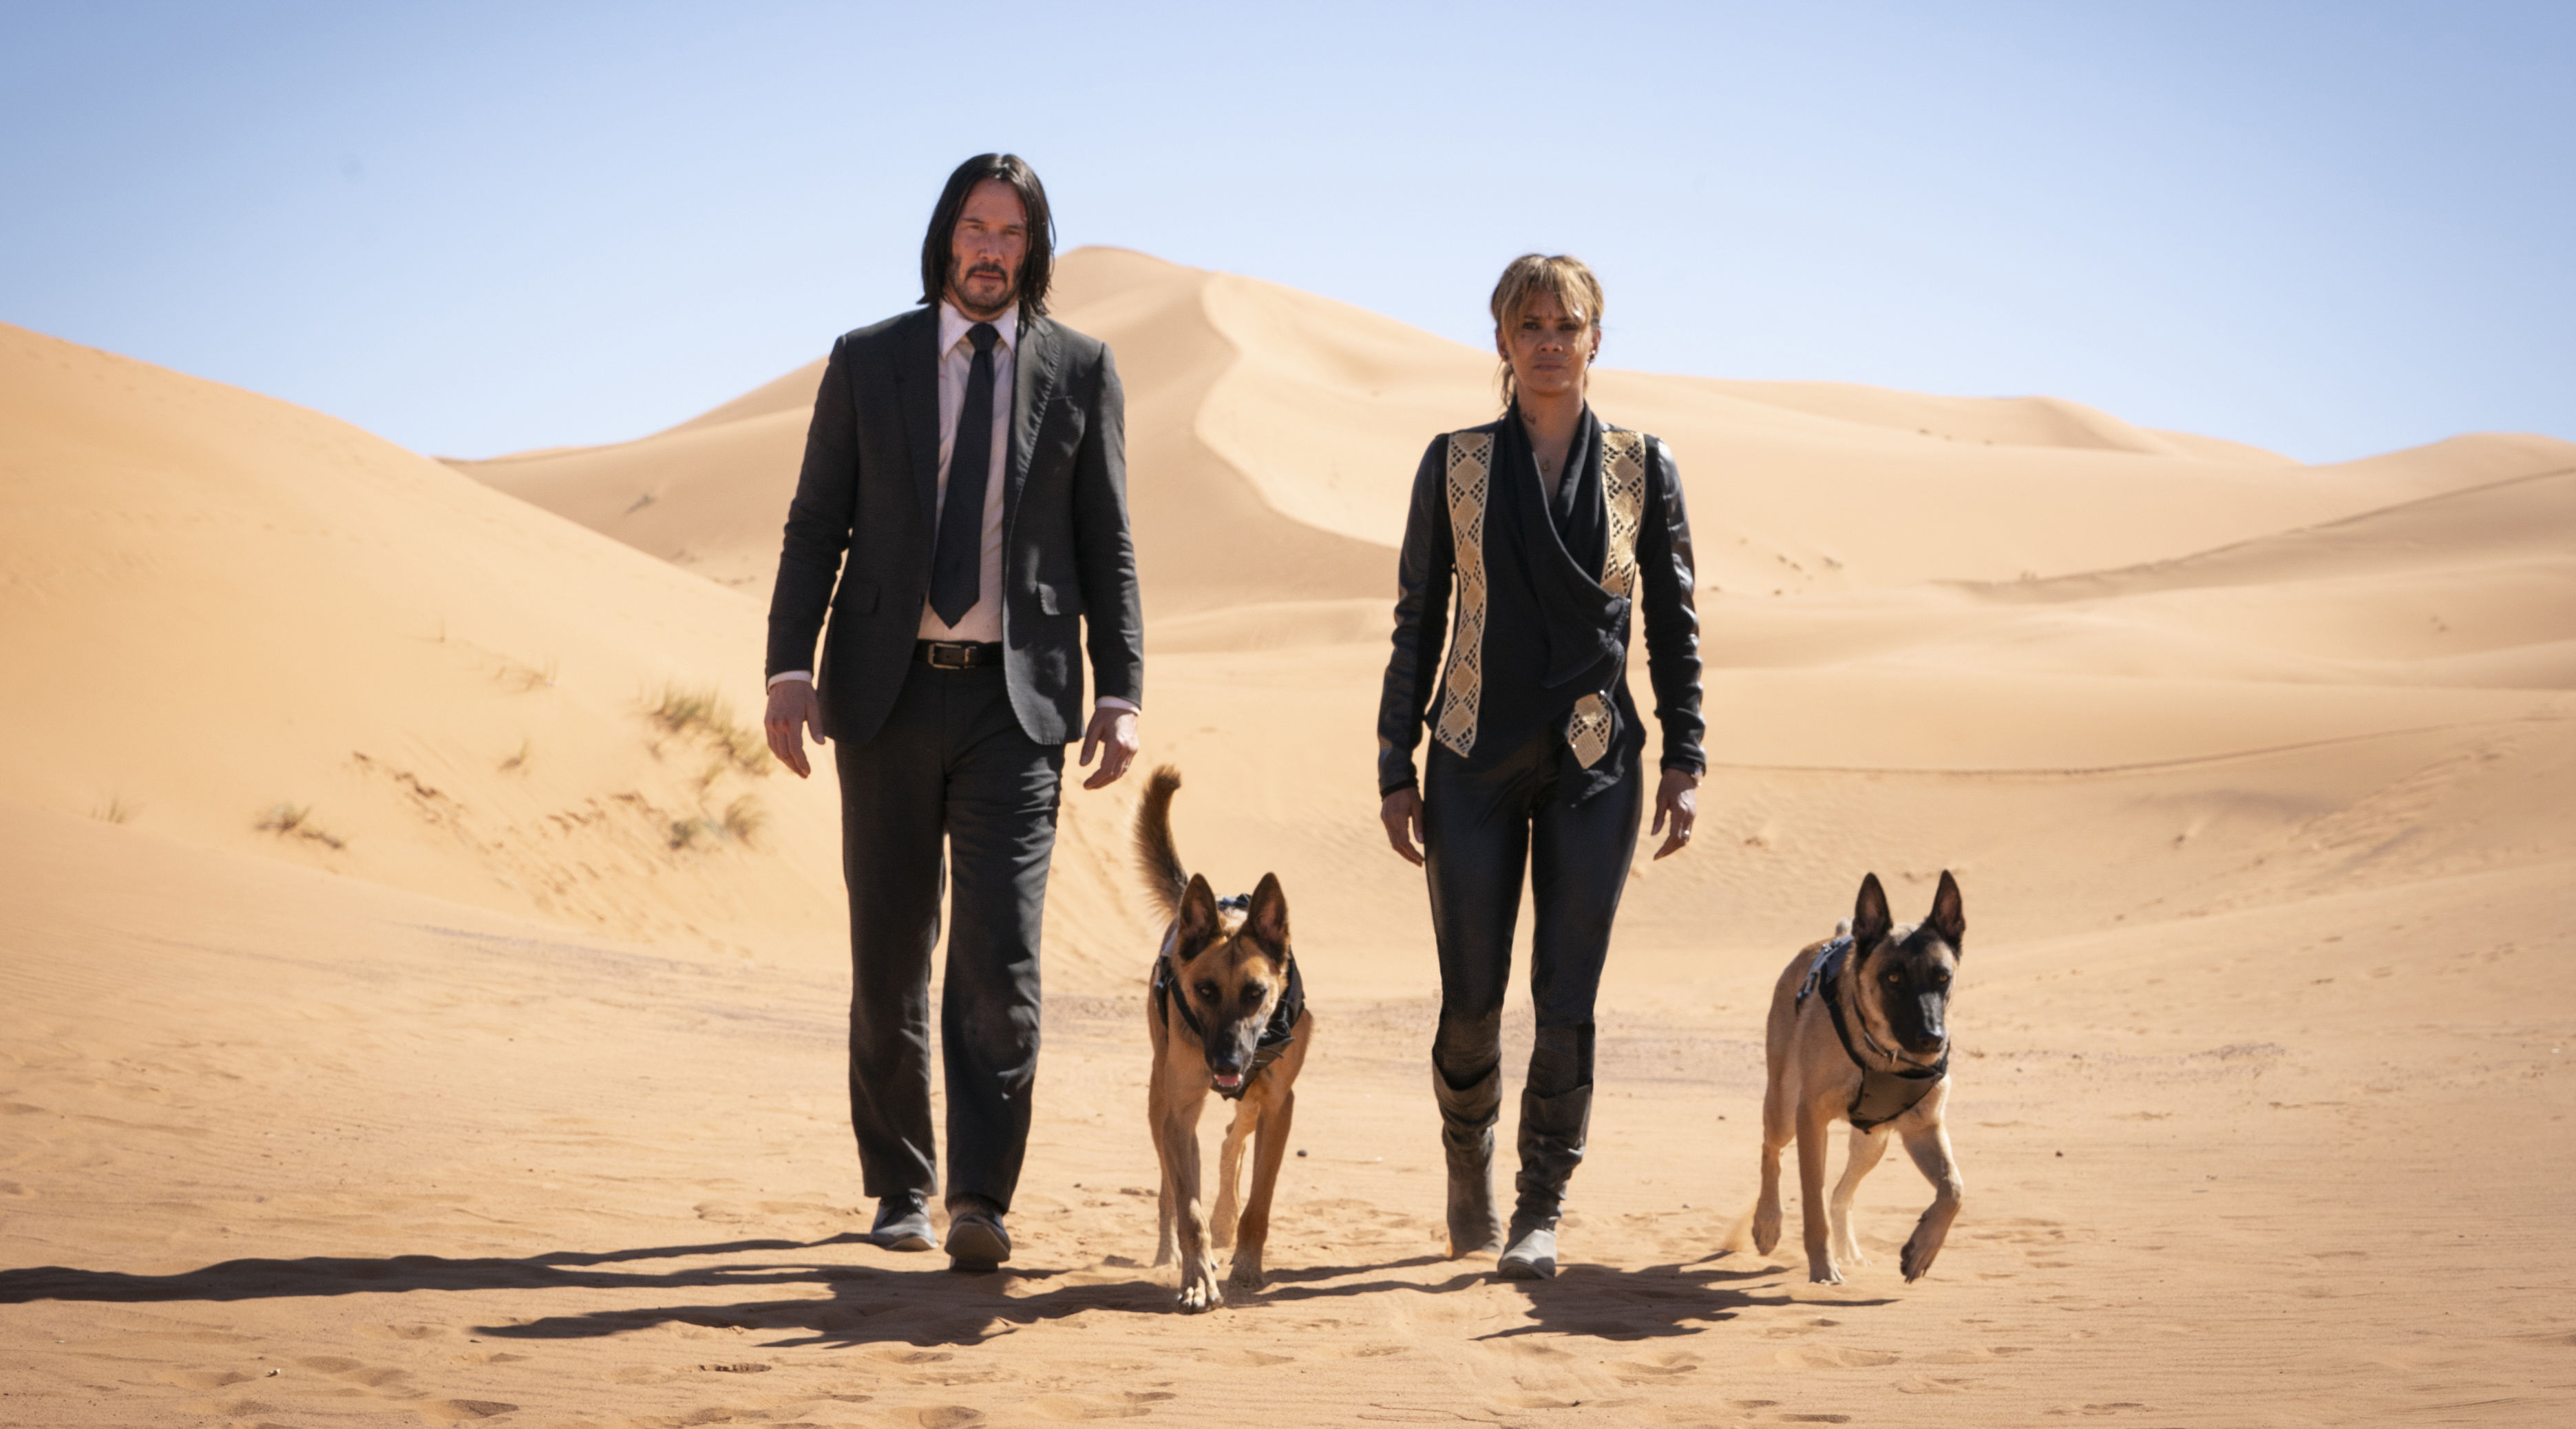 John Wick 3 - Parabellum takes No. 1 box office spot in first weekend | SYFY WIRE